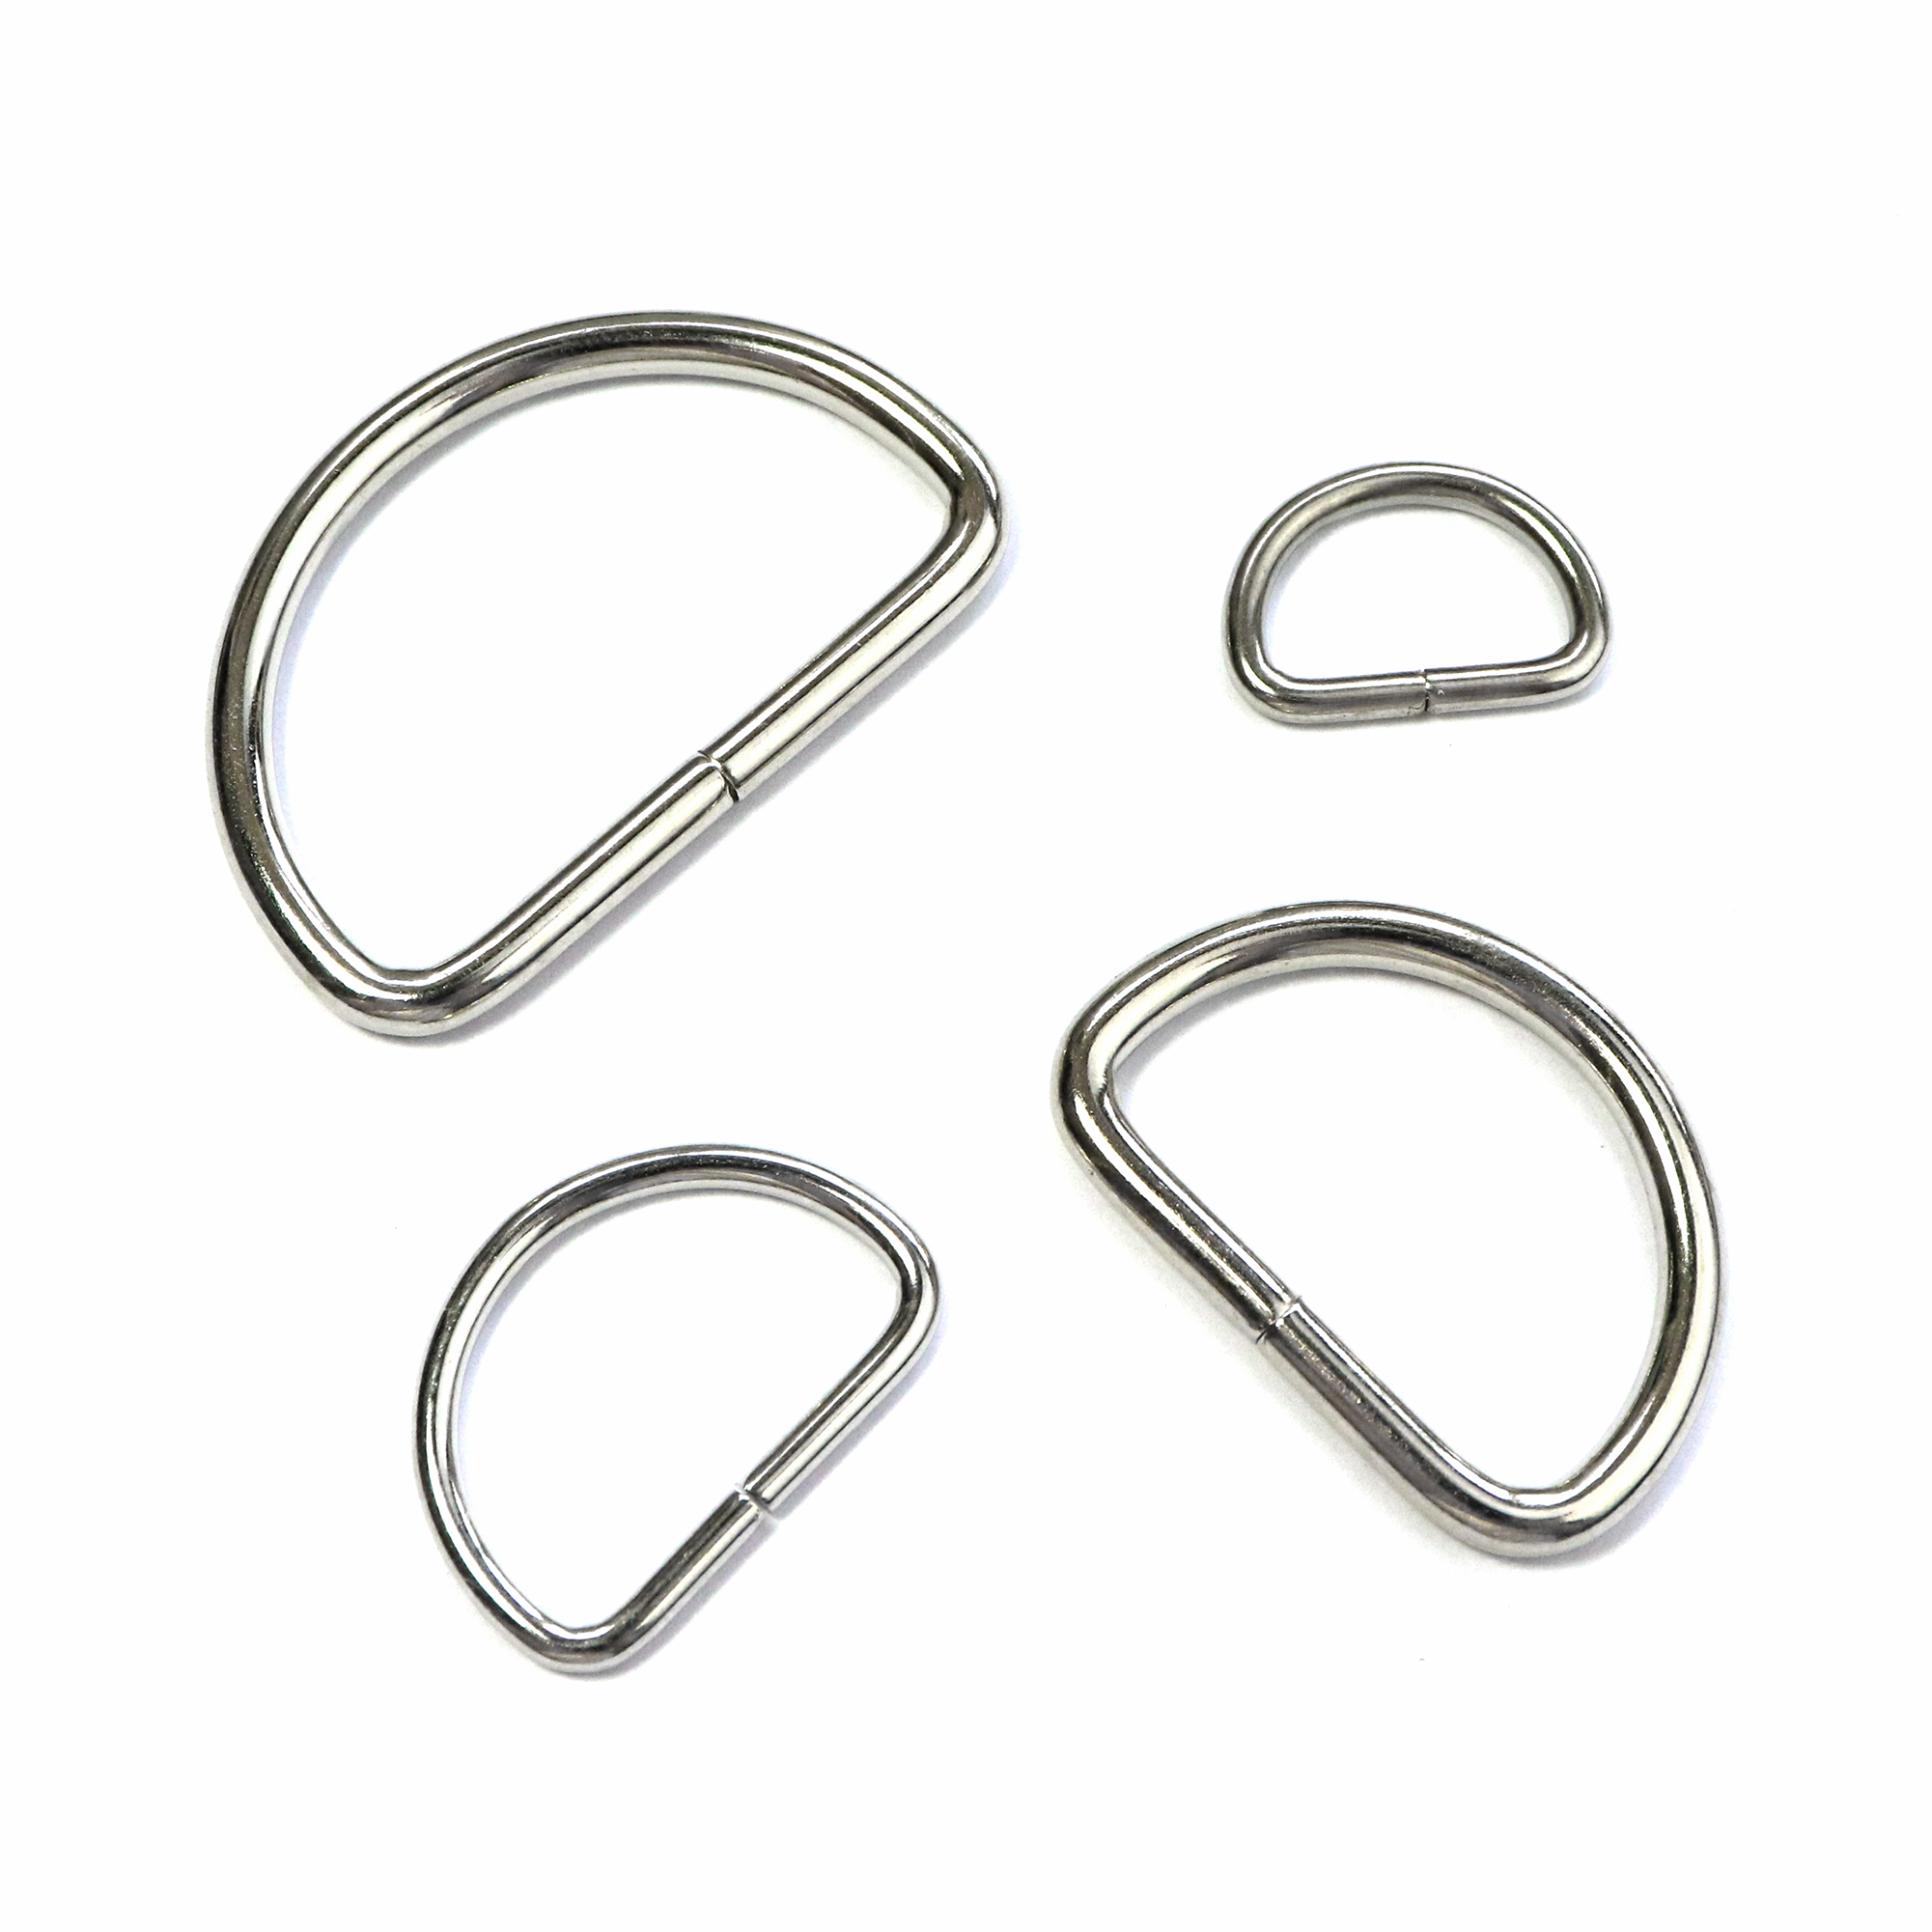 Metal D Ring Non Welded D-Rings Nickel Plated Silver 0.75 Inch (100 Pack) 